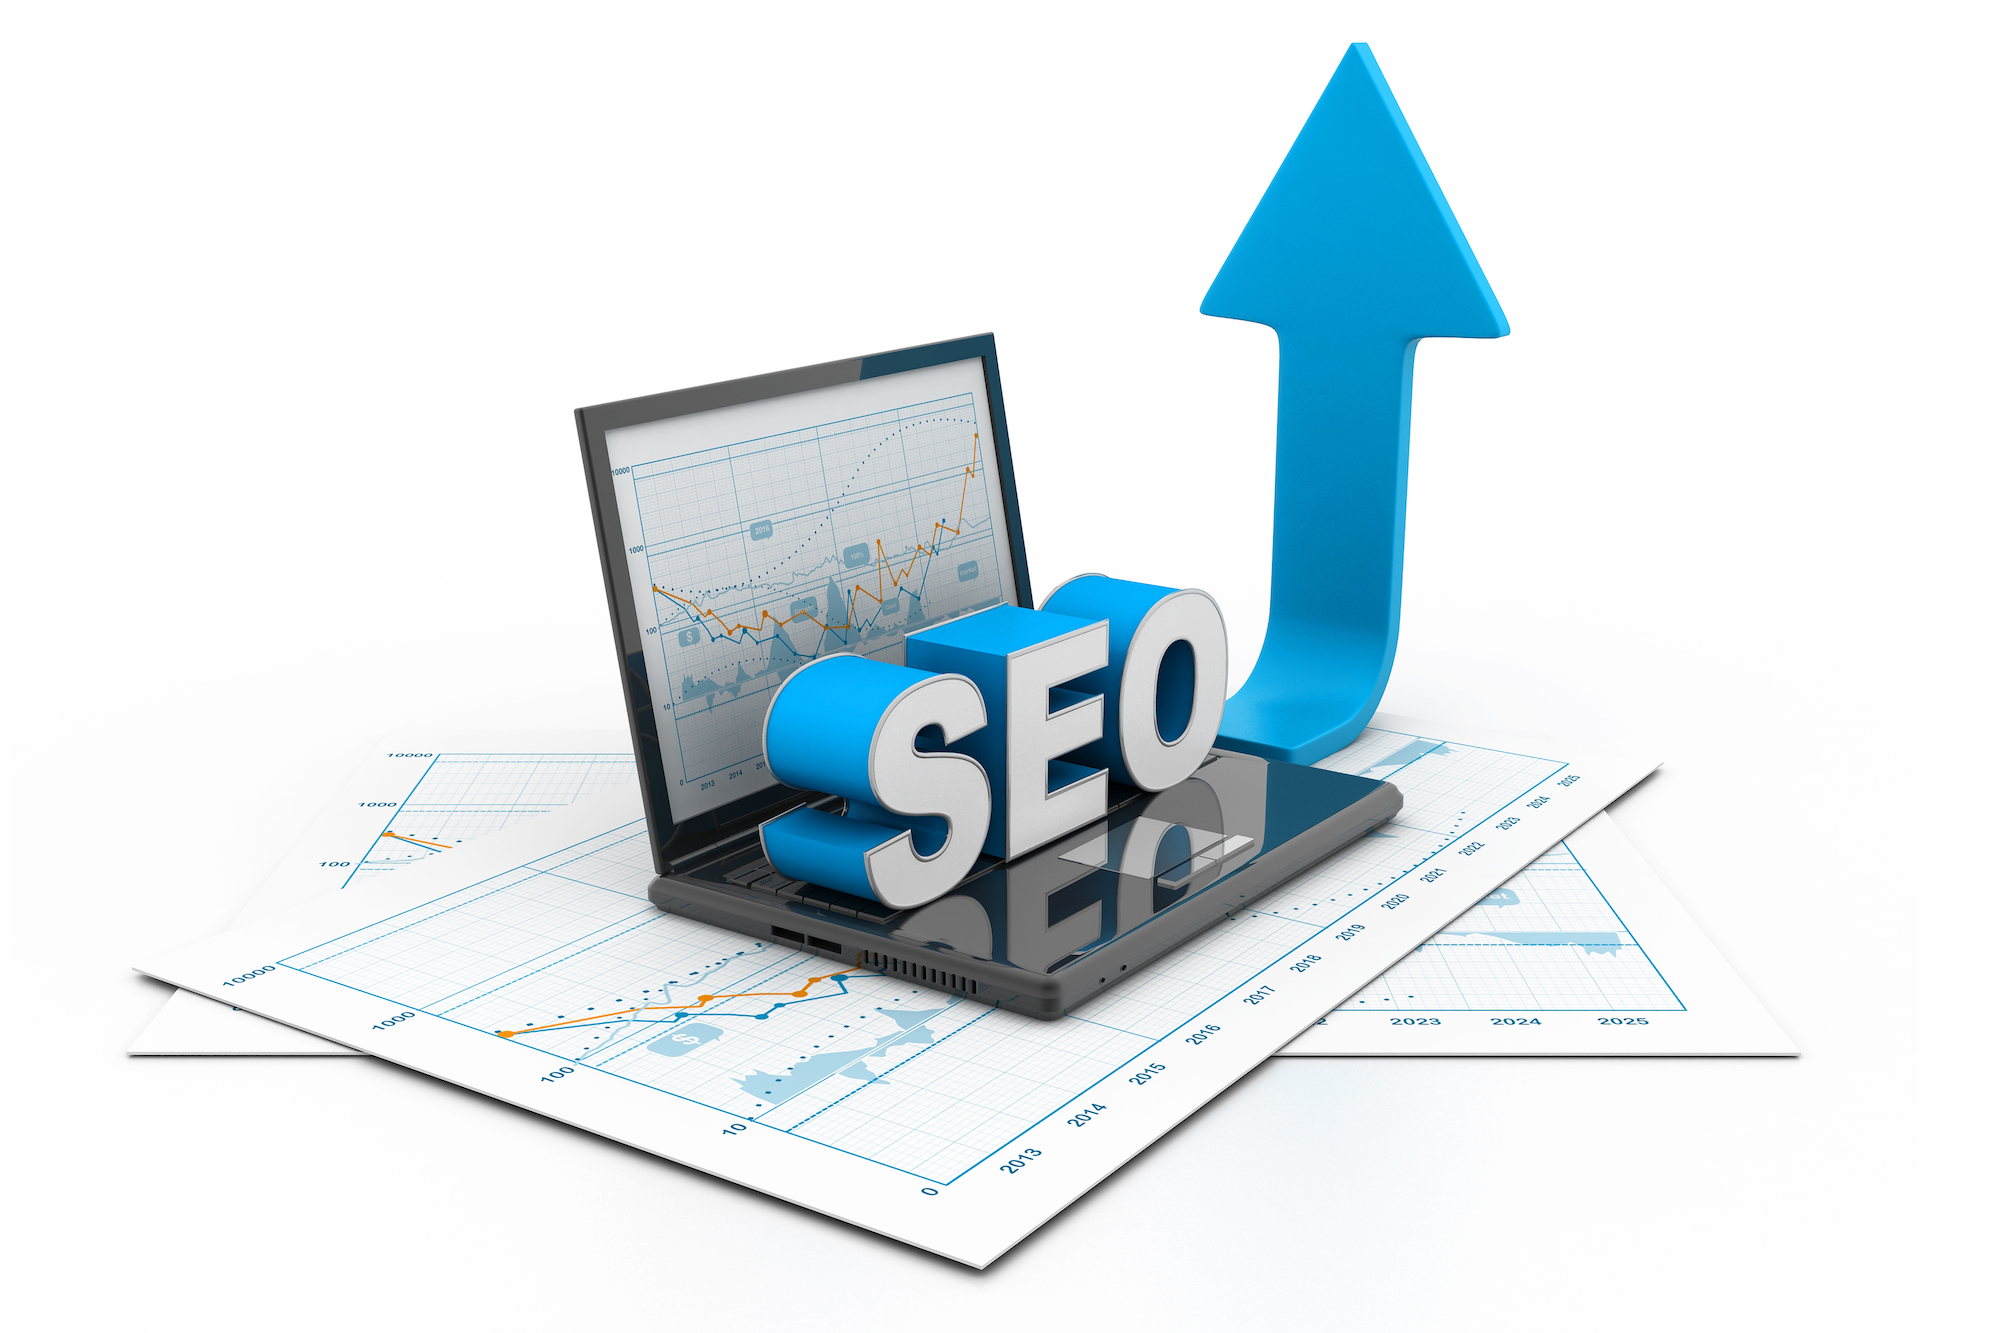 Free SEO Classes - Learn How to Boost Your Search Engine Rankings